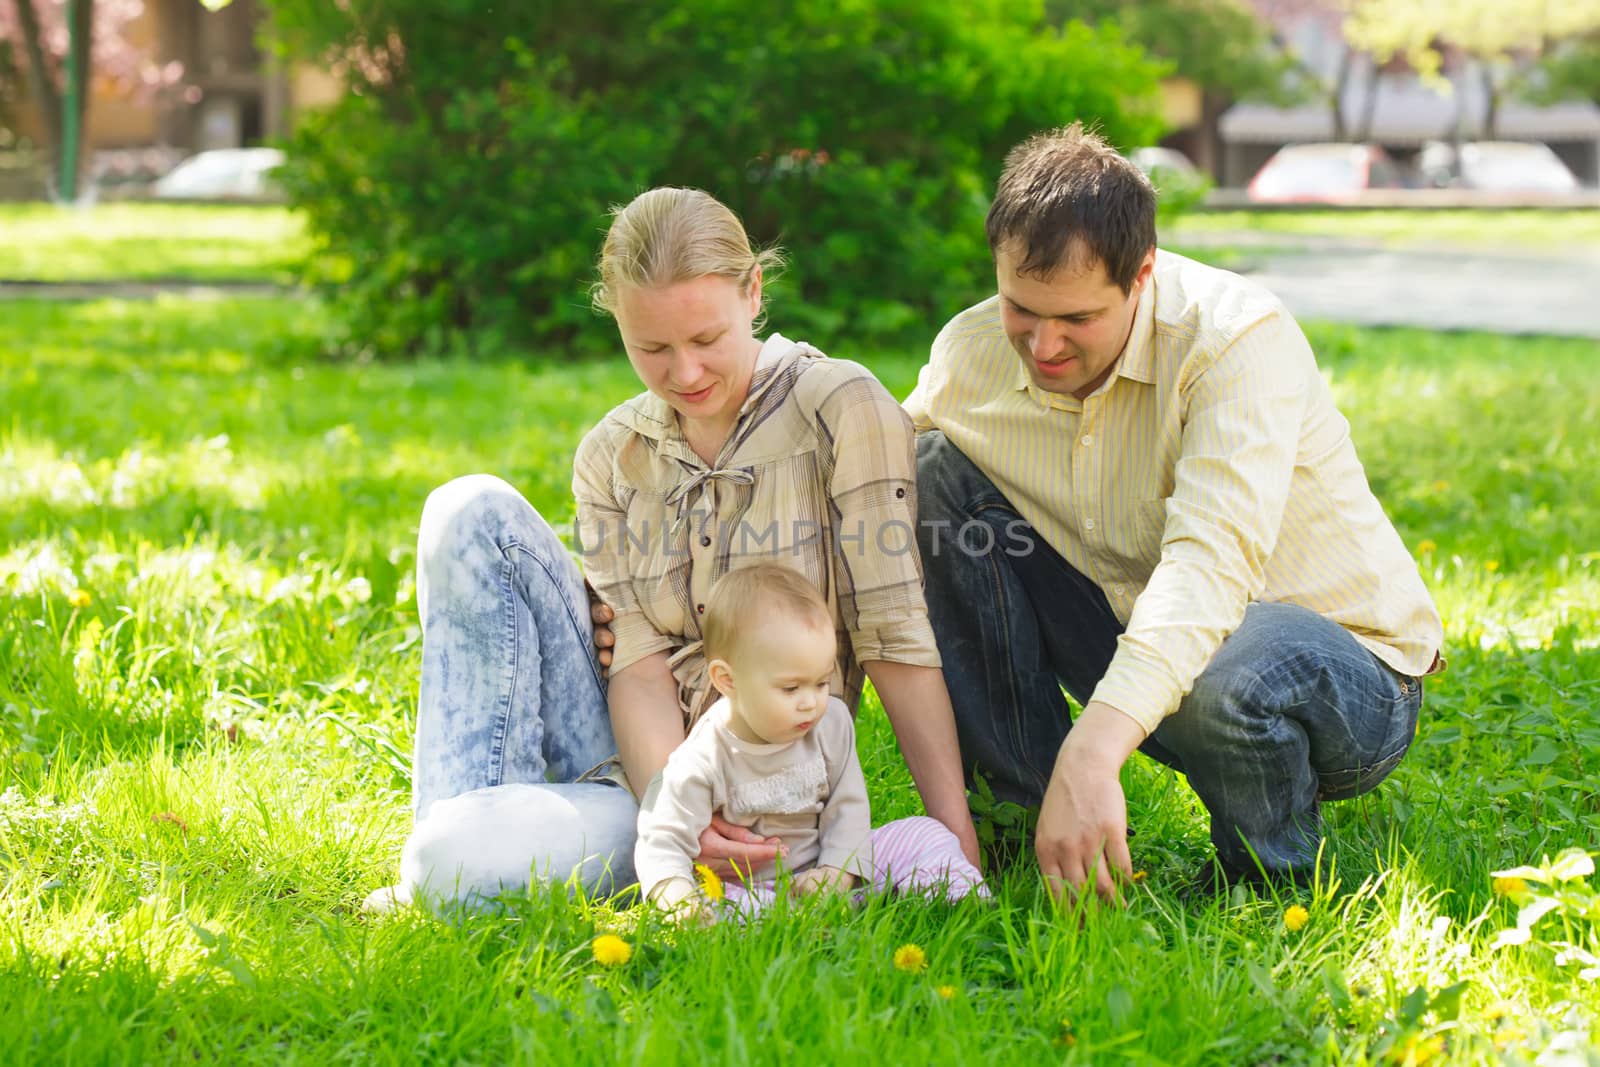 Family with child play in the park on green grass